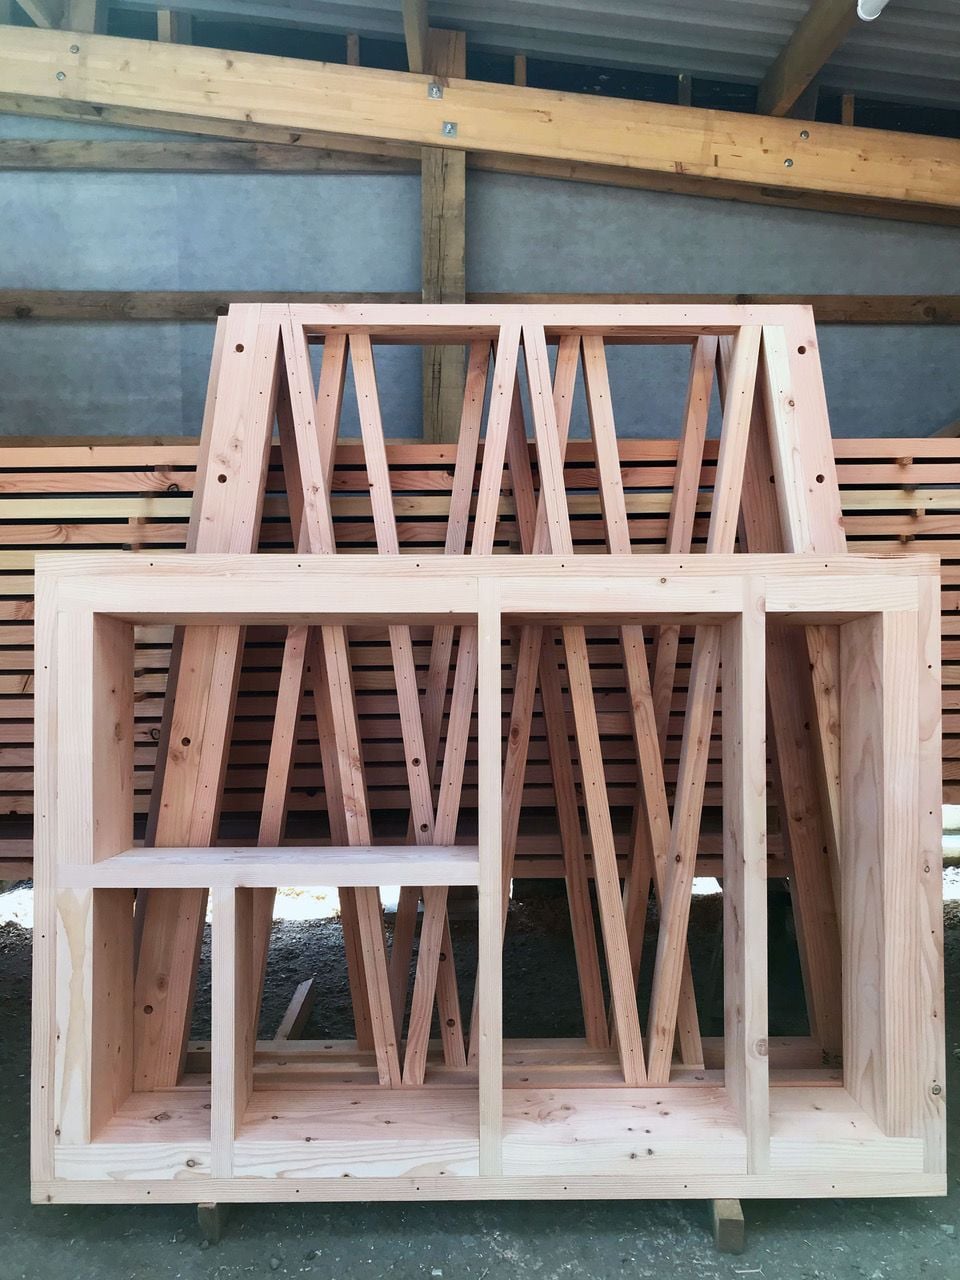 The modular wooden frames were prefabricated by De Matos Ryan before being brought to the Penfold's location. 